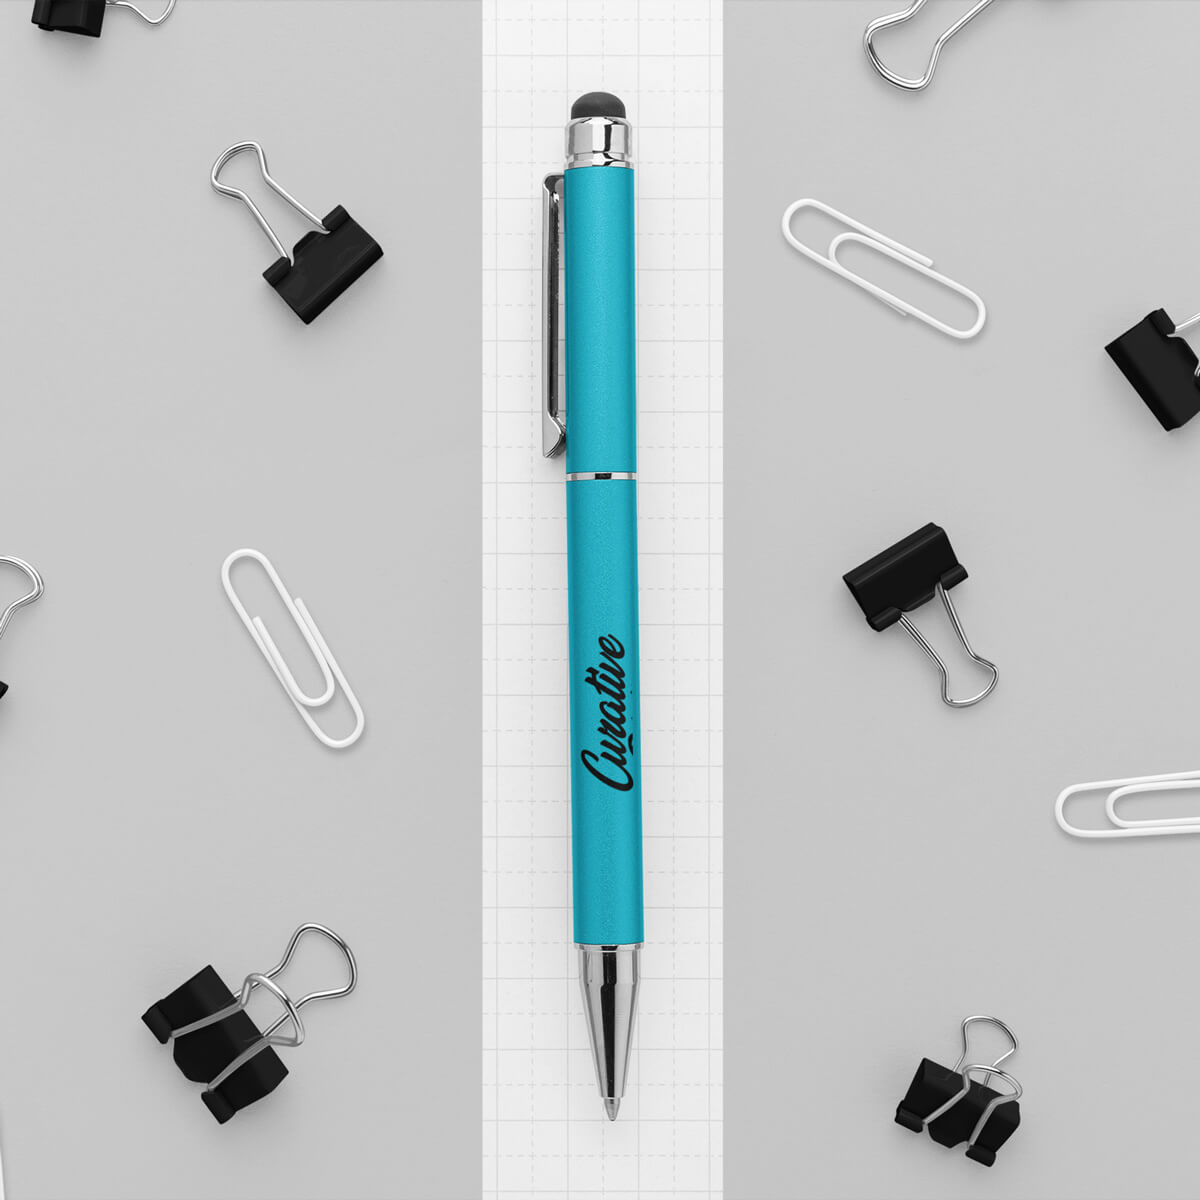 Design turquoise with black imprint custom stylus pens promotional writing implements by curative printing